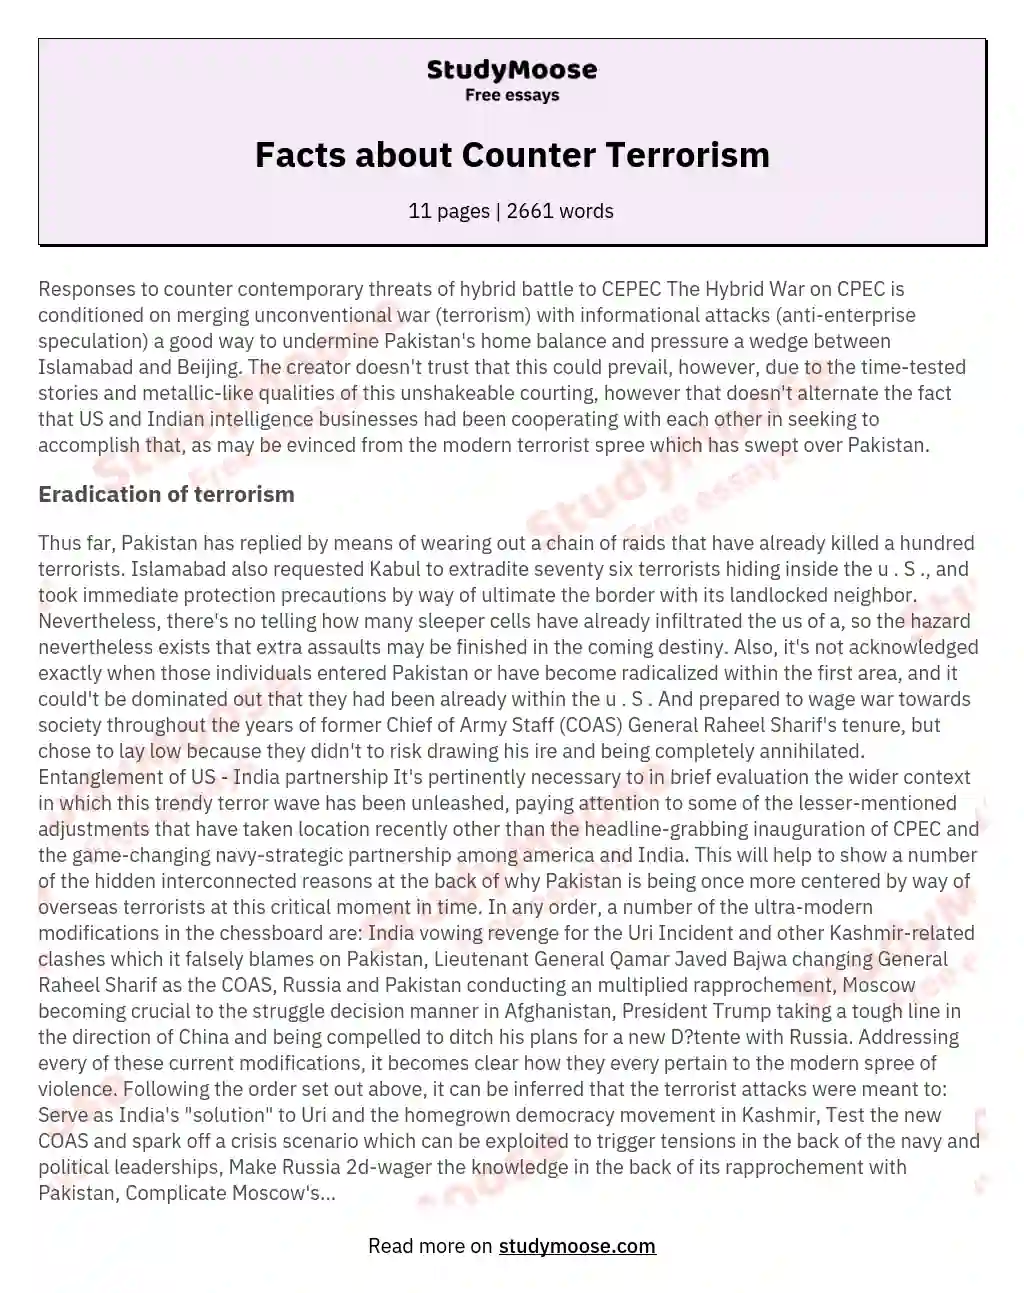 Facts about Counter Terrorism